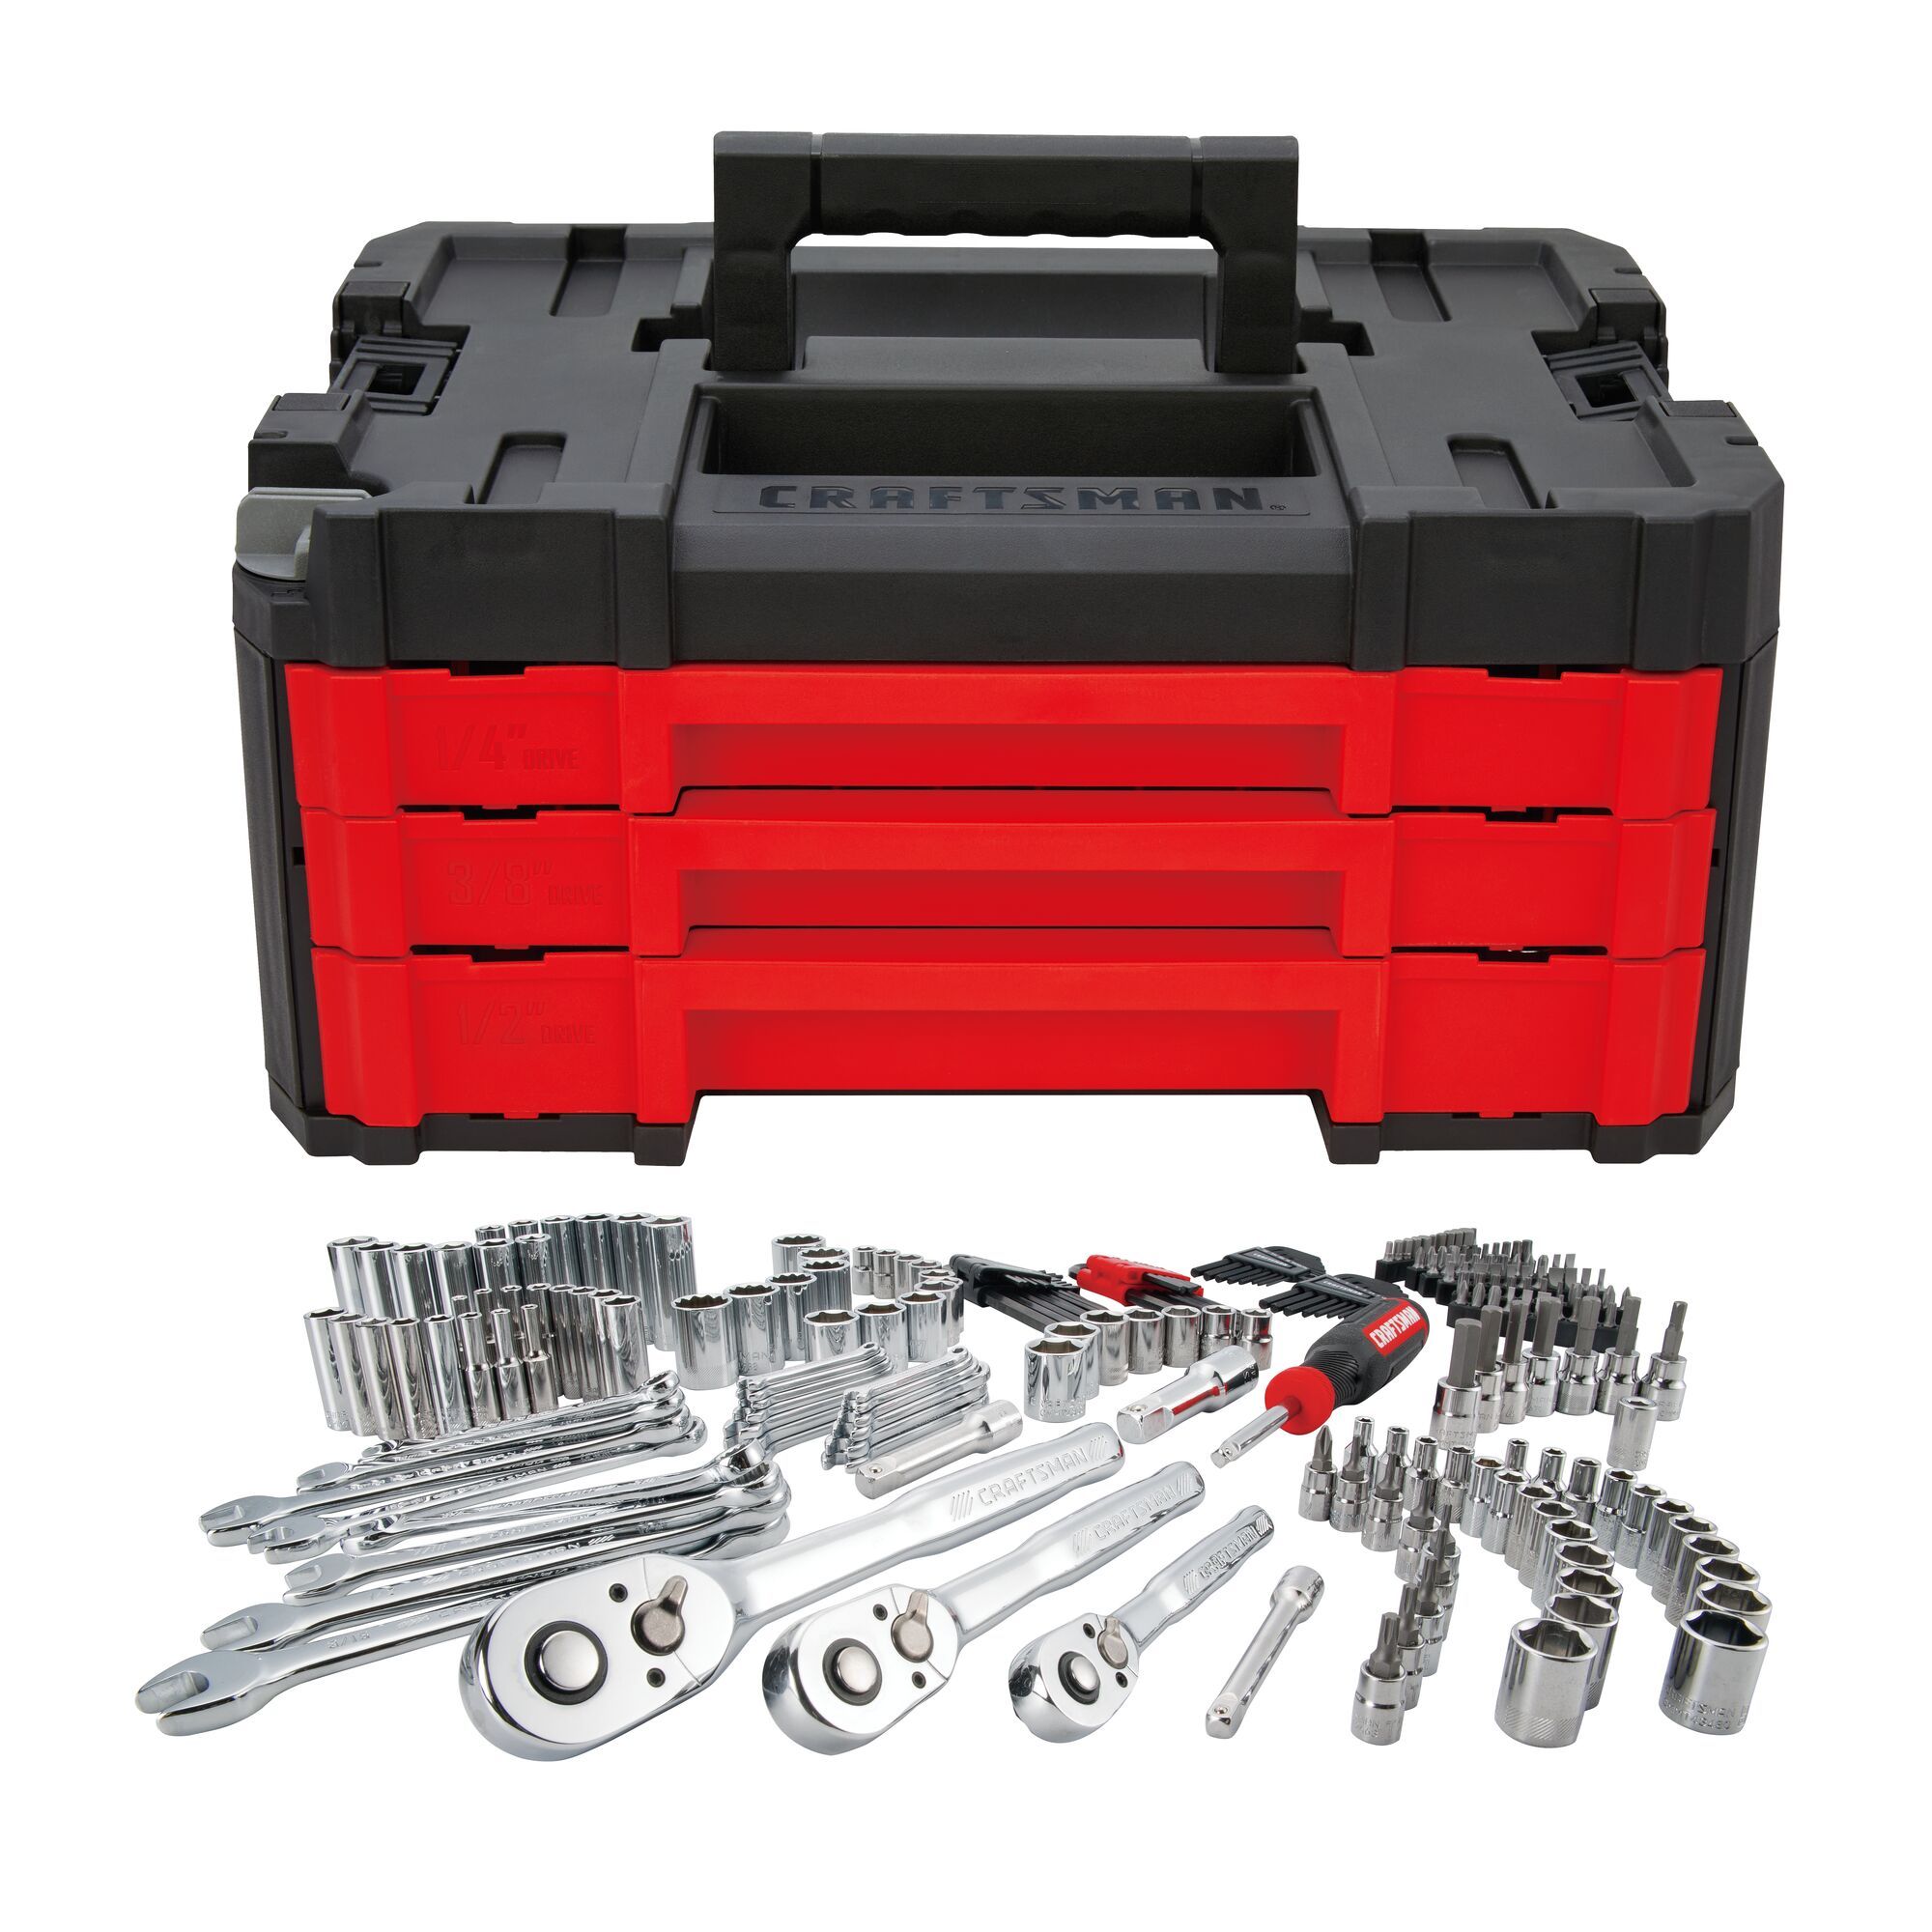 Deal Alert: This Complete Mechanics Tool Set Is Nearly 50 Percent Off at Lowe’s Today